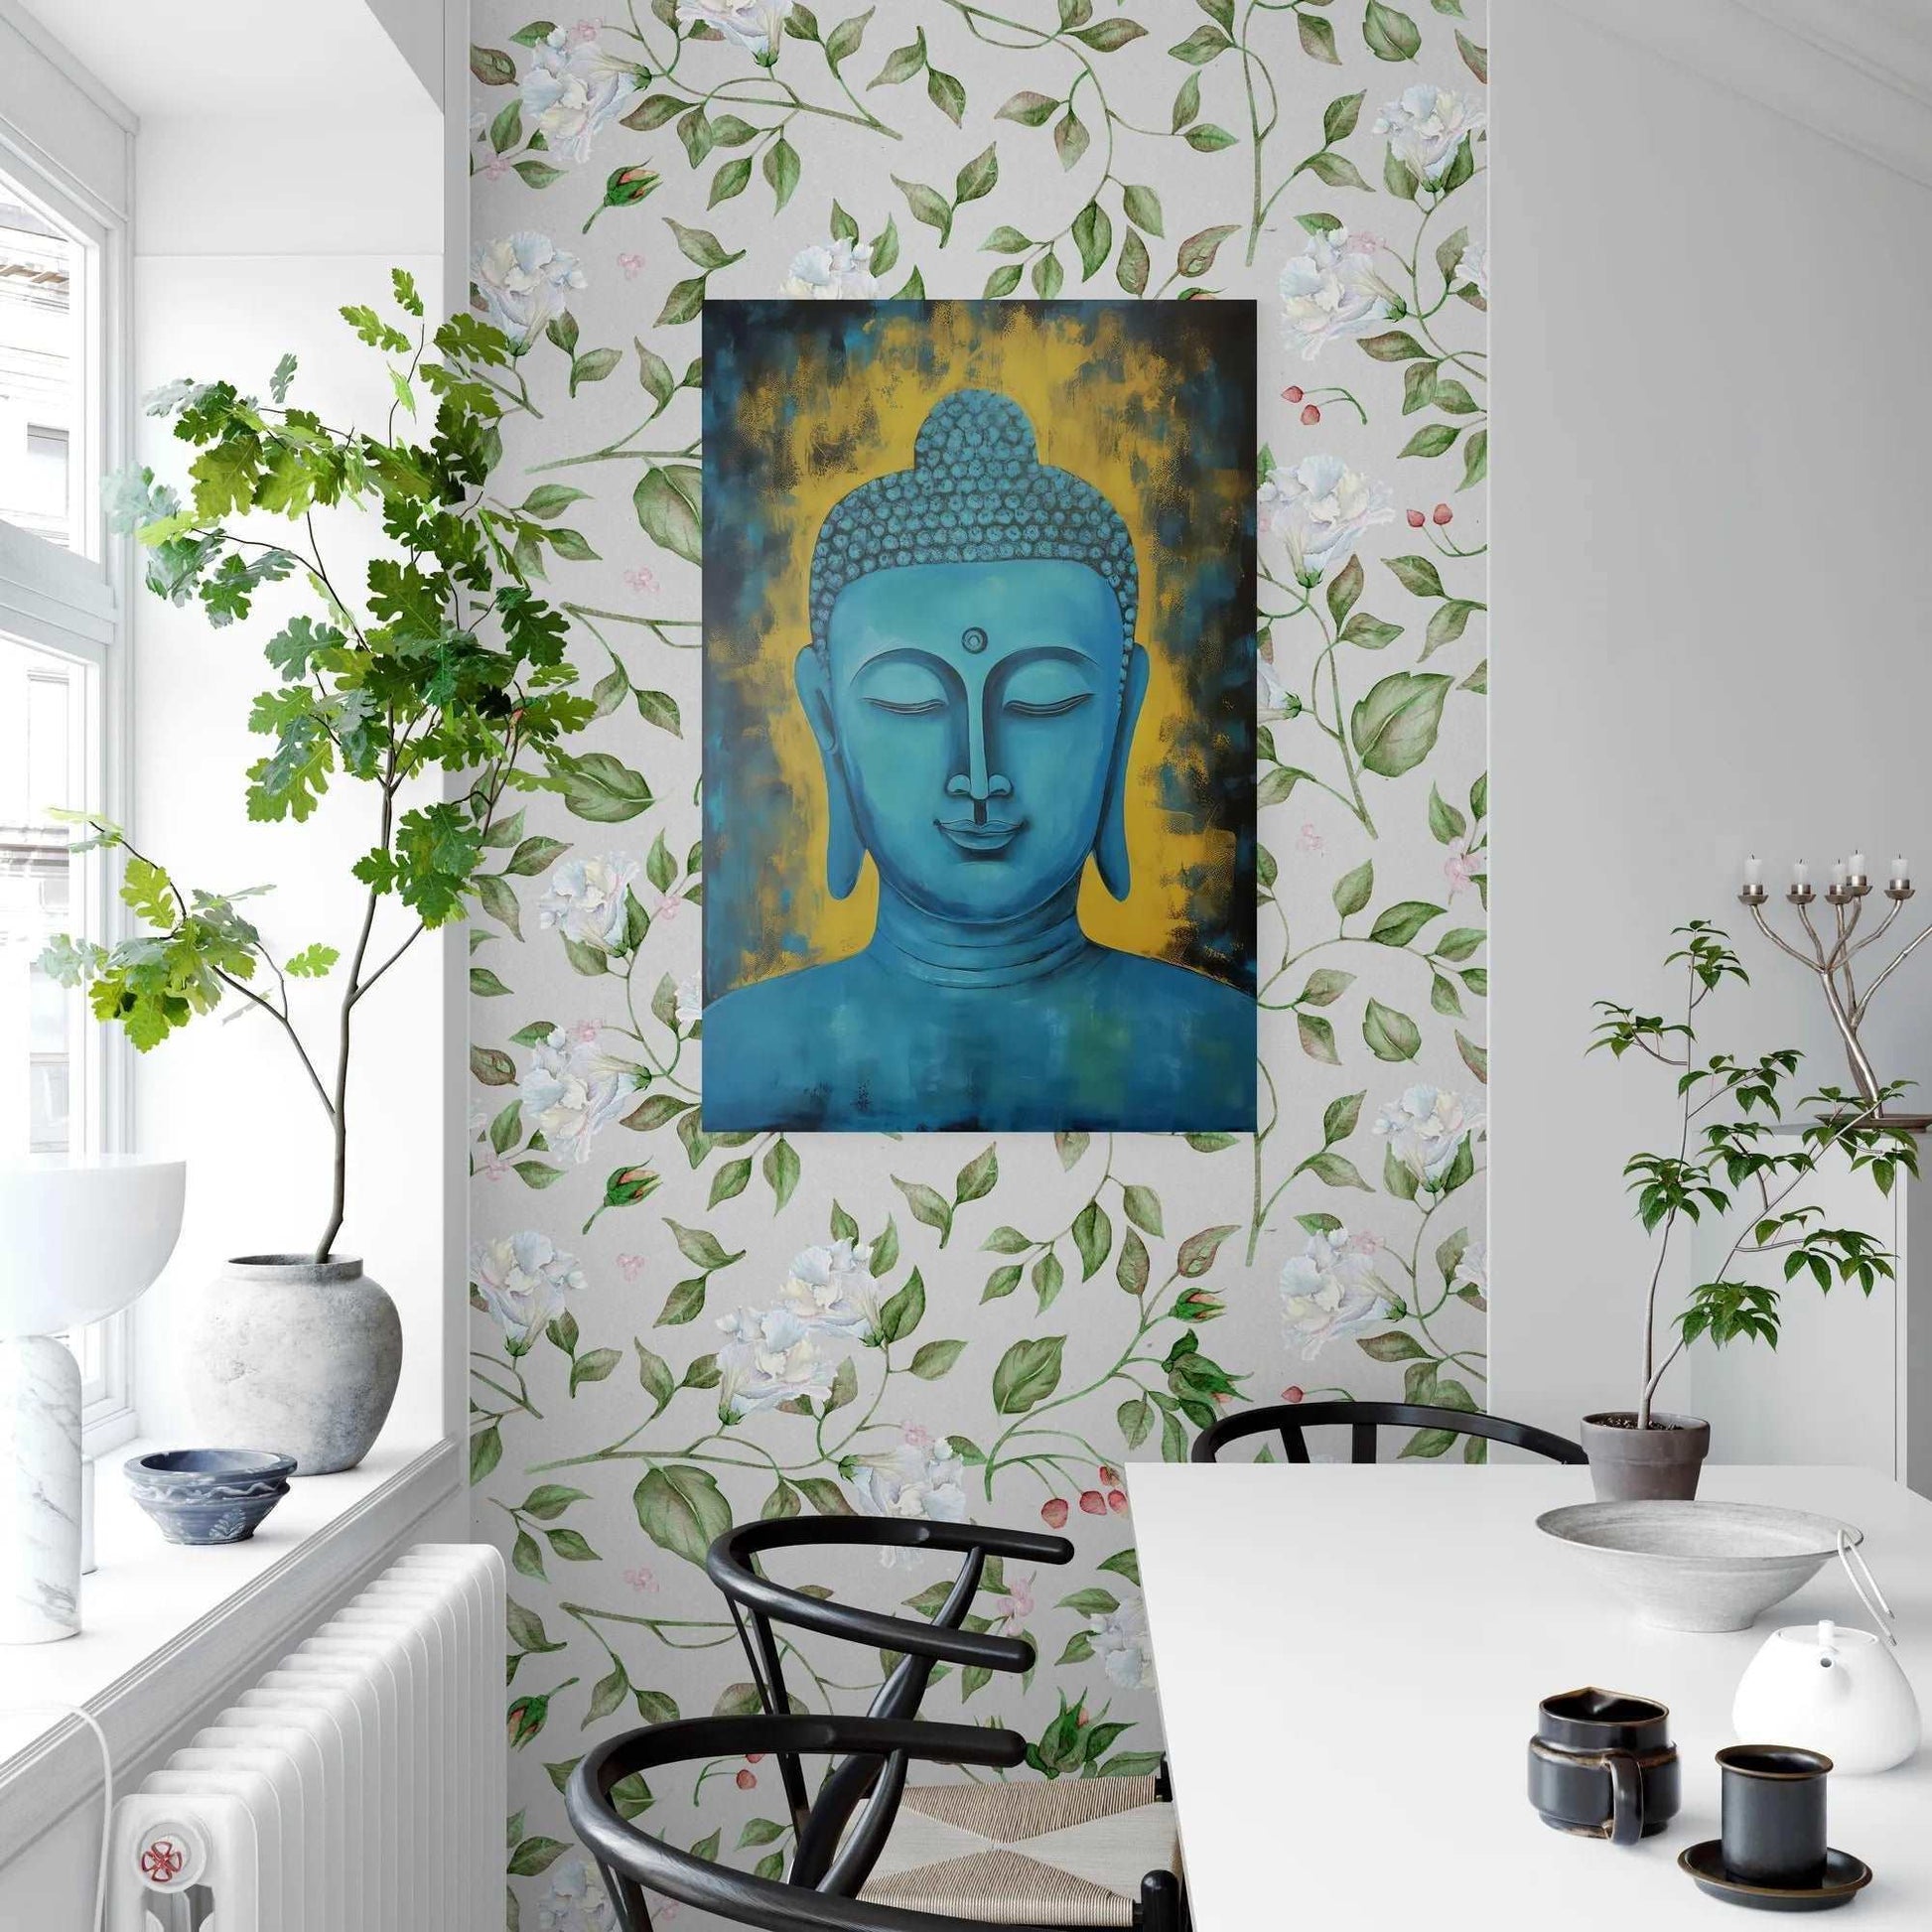 Bright dining area with a teal and gold Buddha painting, adding a touch of serenity against a floral wallpaper and natural light.